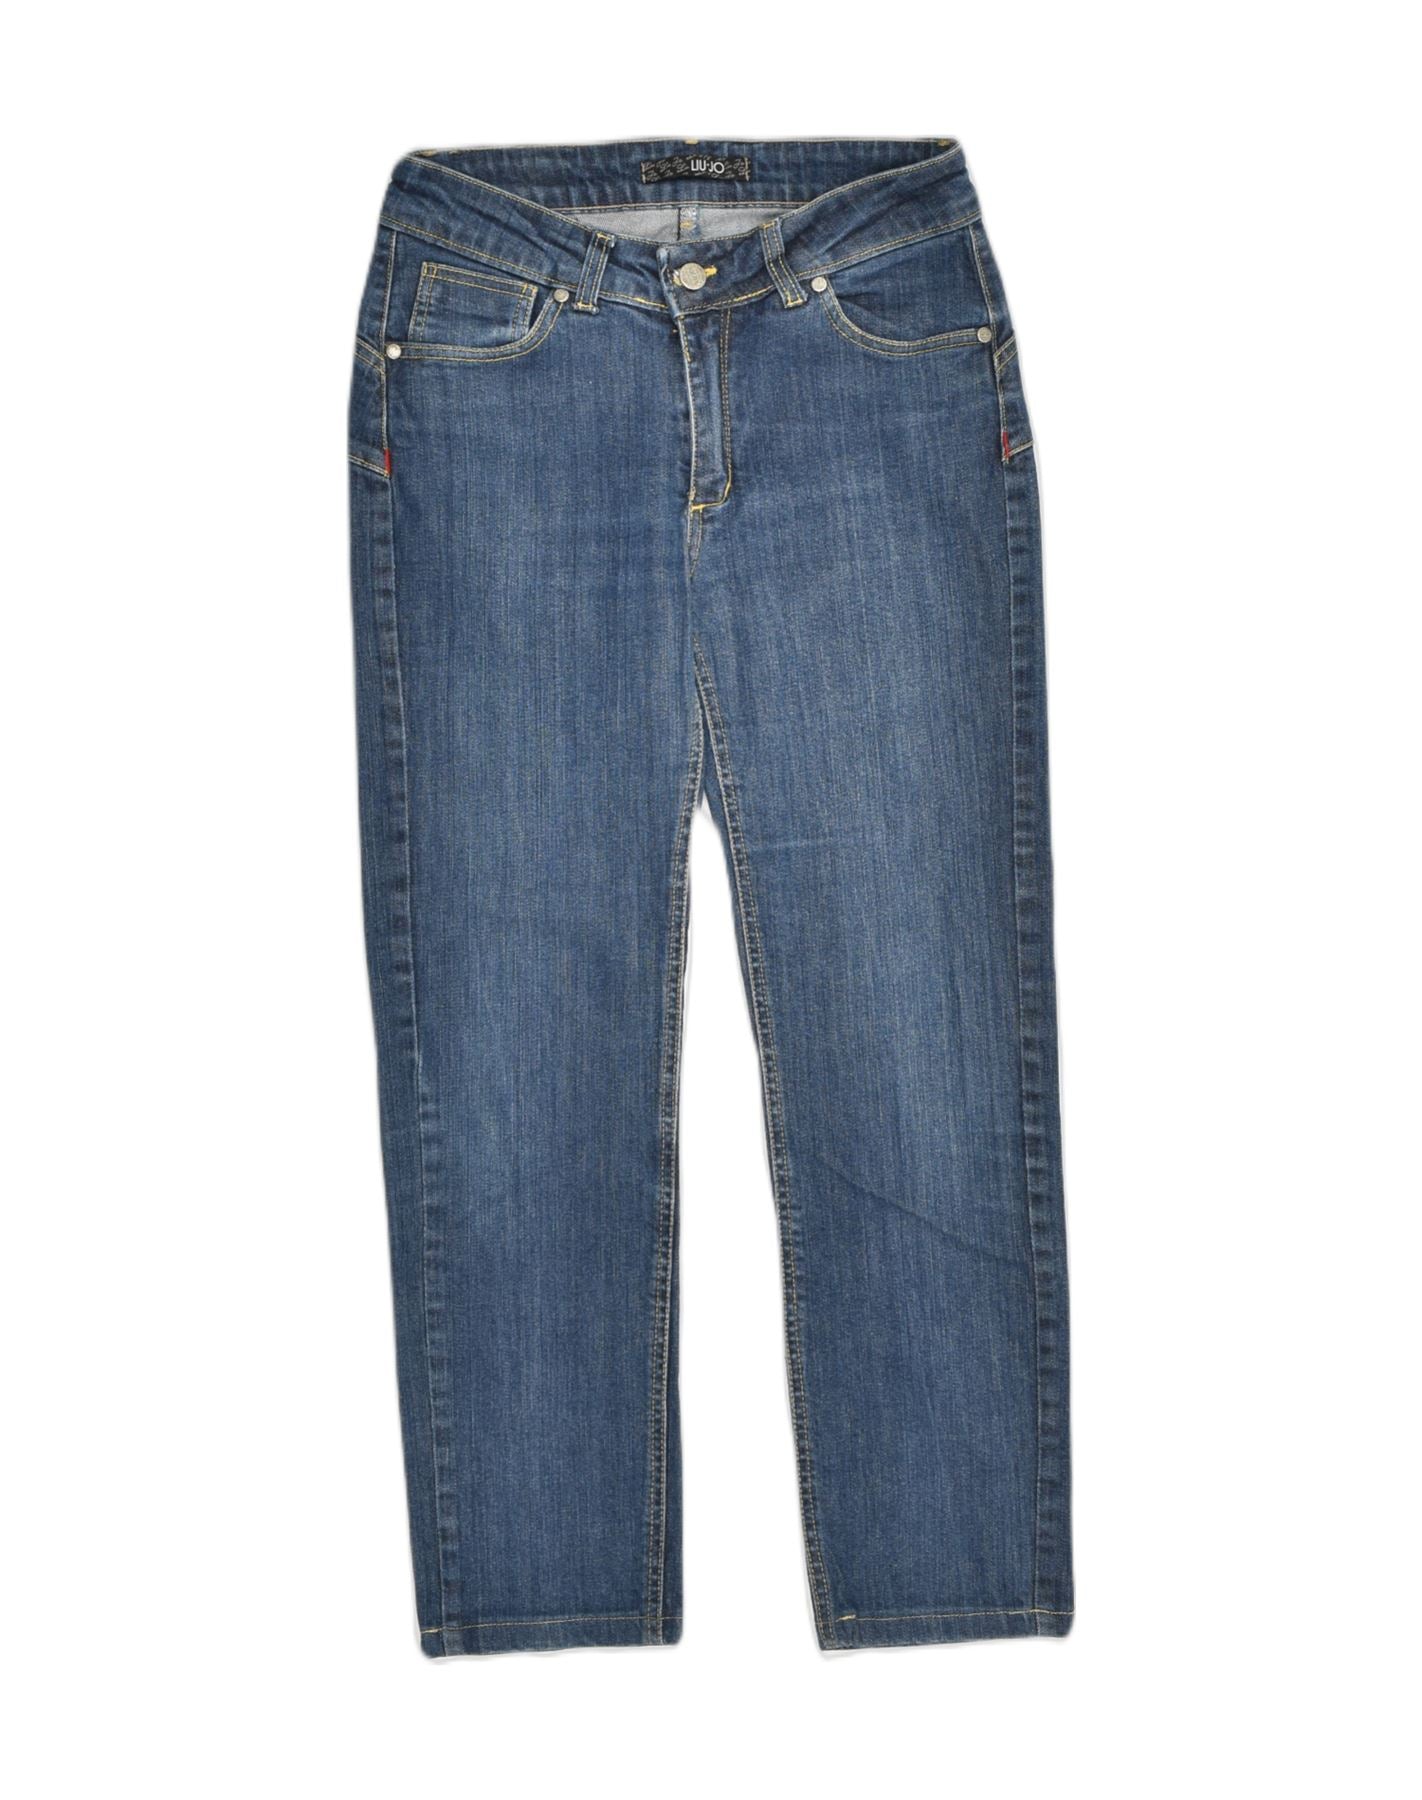 LIU JO Womens Straight Jeans W28 L25 Blue, Vintage & Second-Hand Clothing  Online